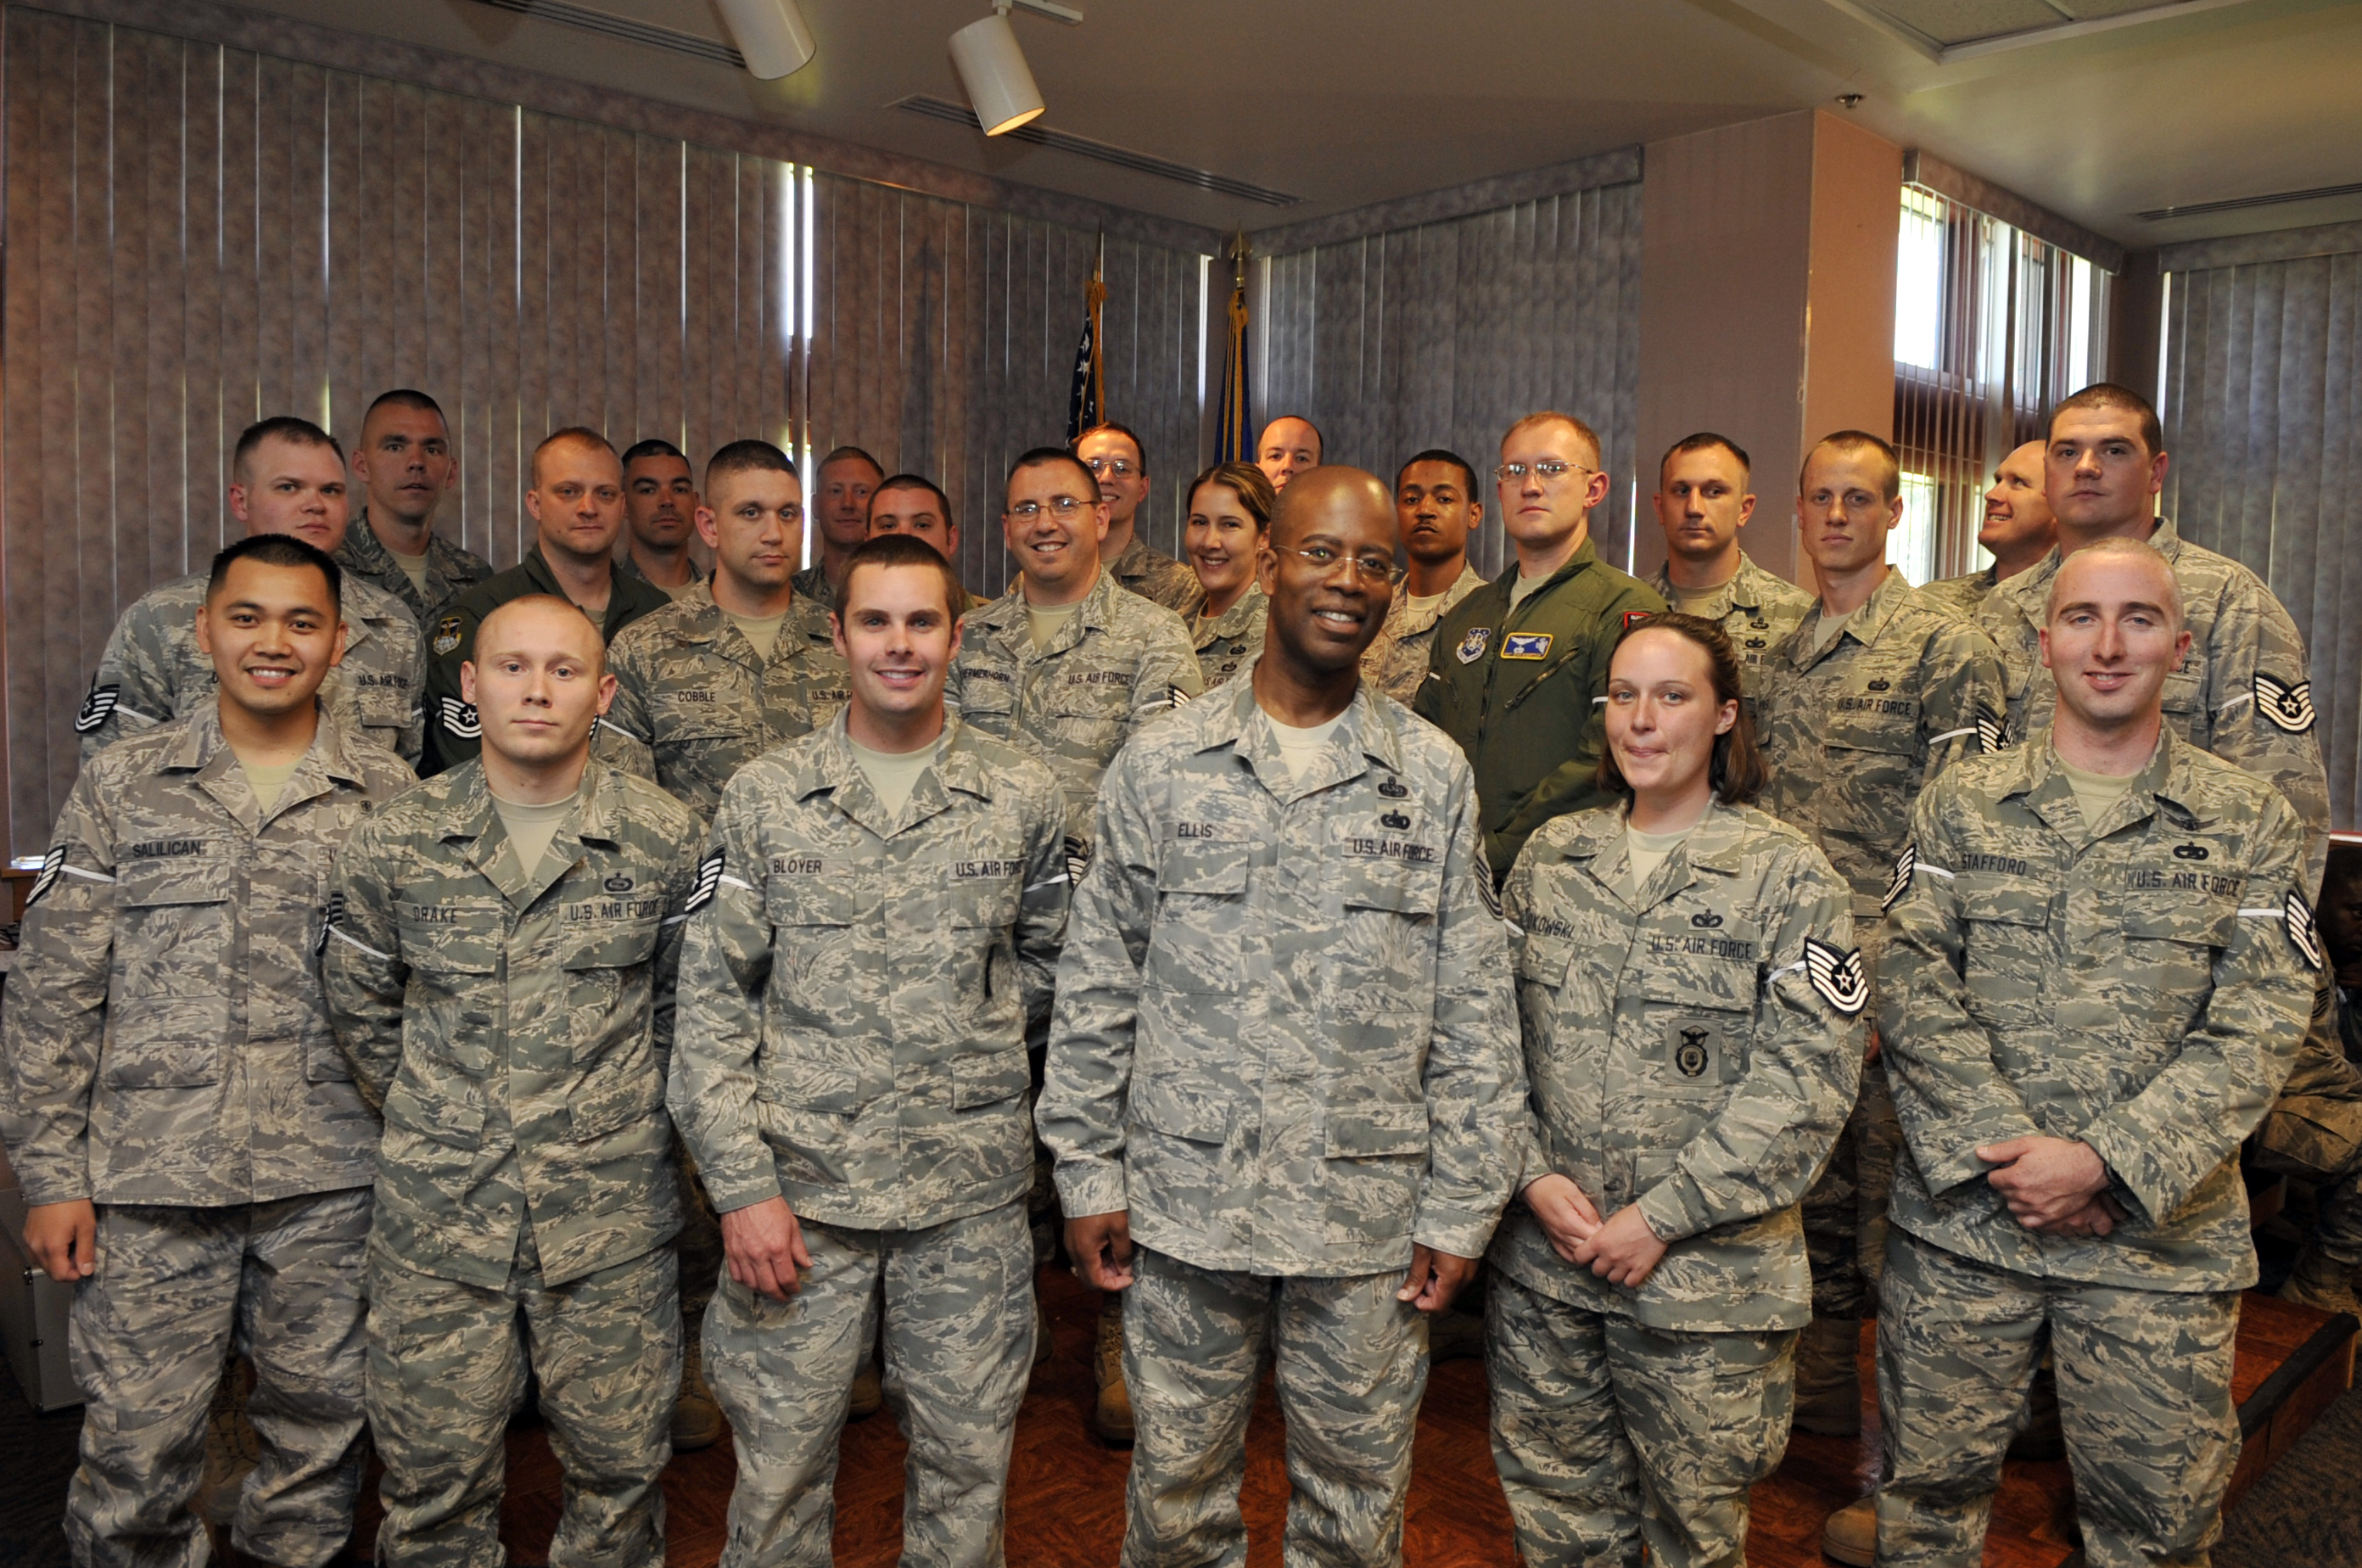 37 Team Buckley members selected for promotion to technical sergeant > Buckley Air ...2784 x 1848